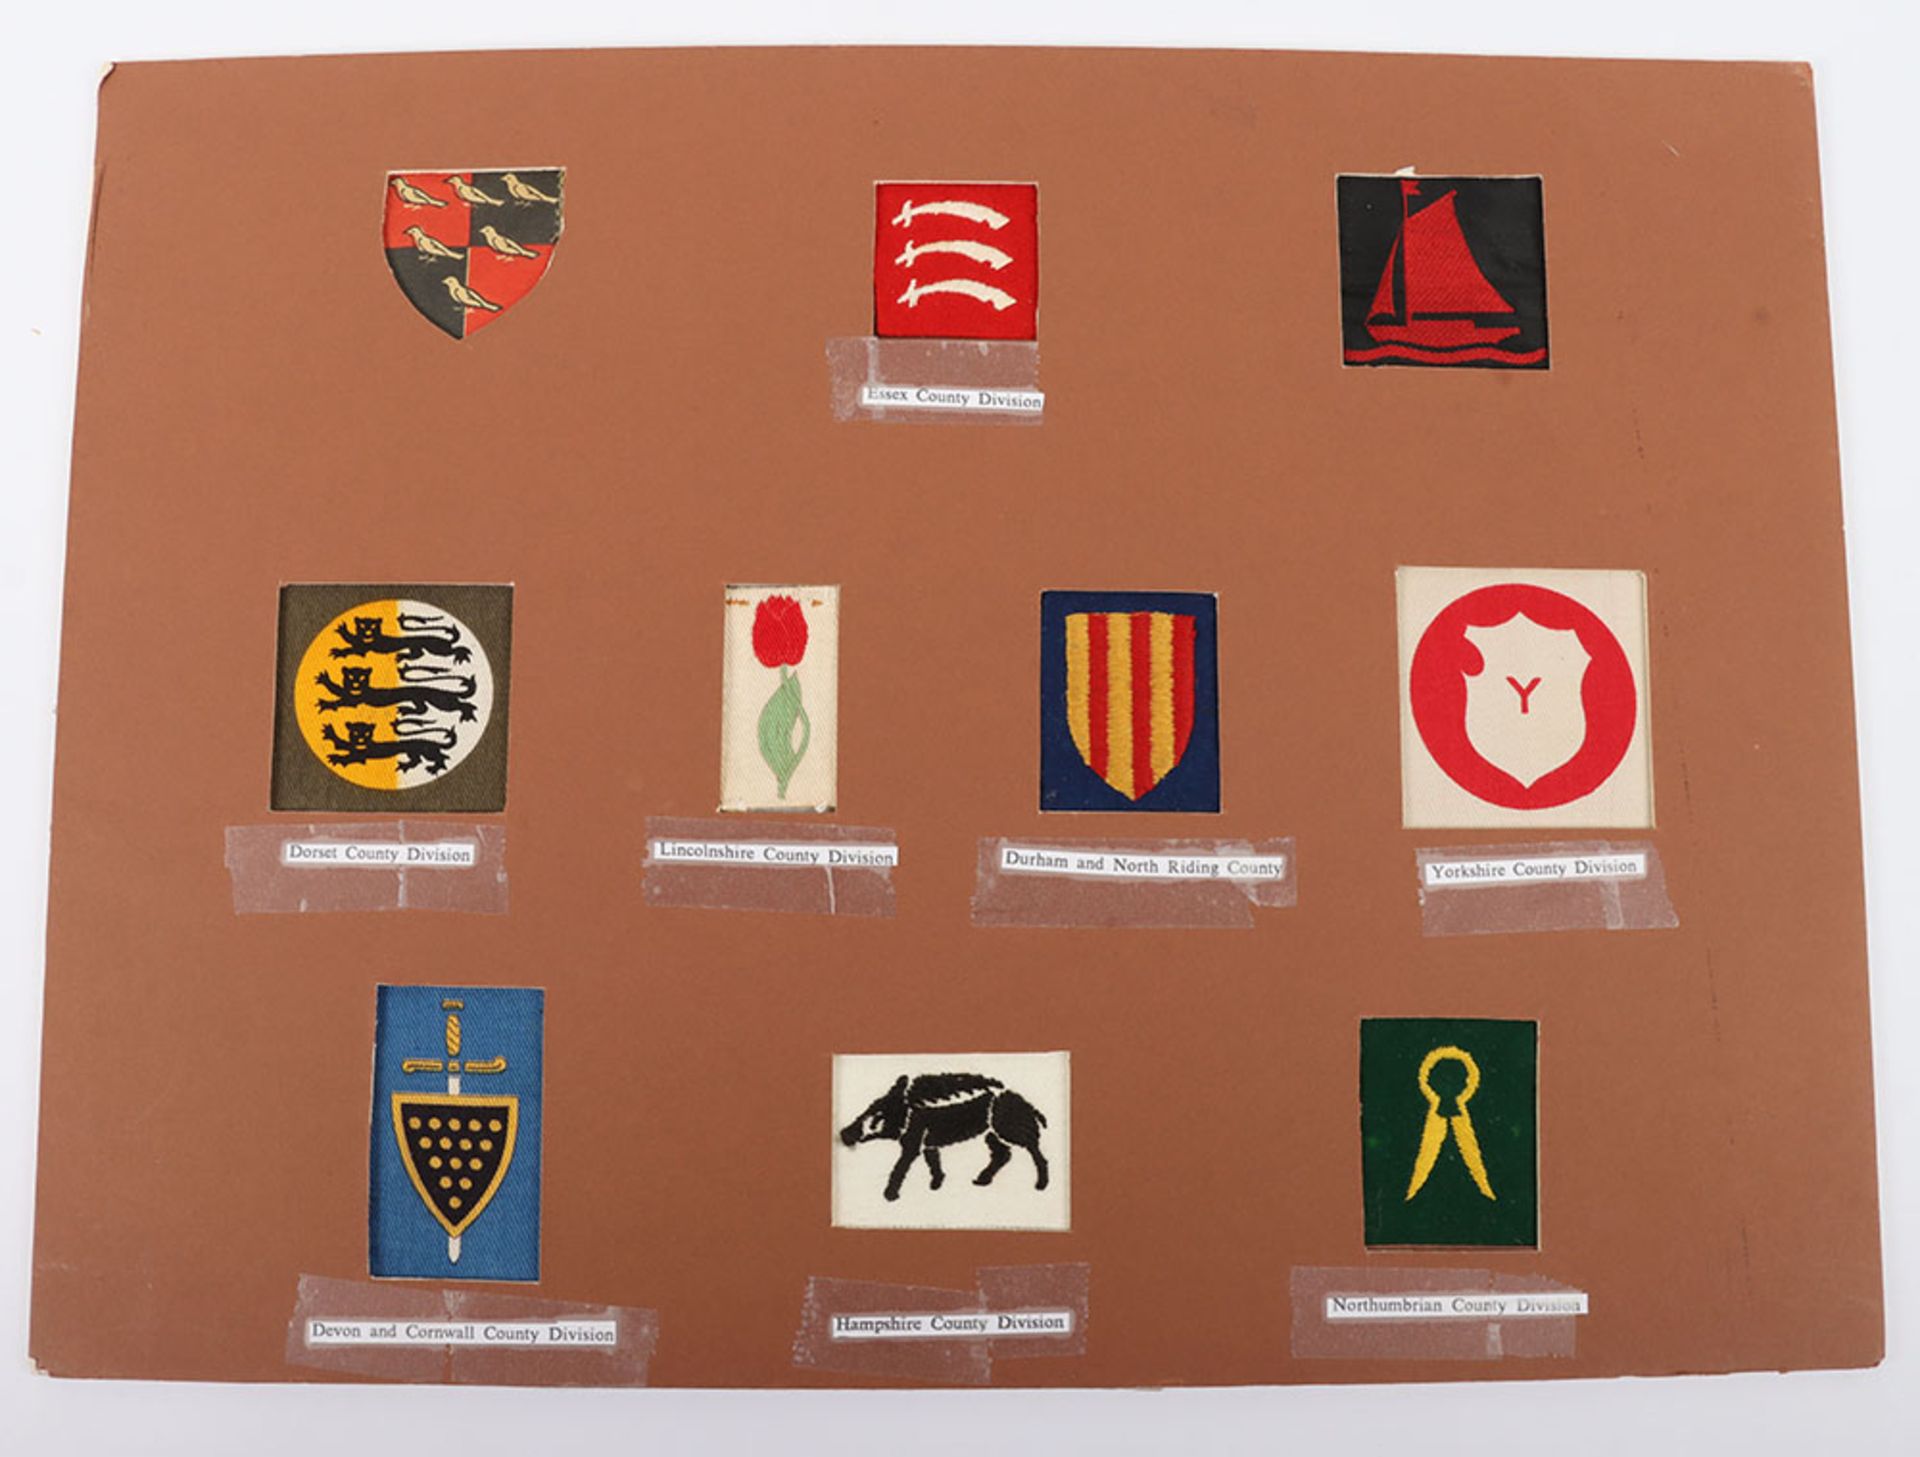 Card of cloth formation signs to British County Divisions